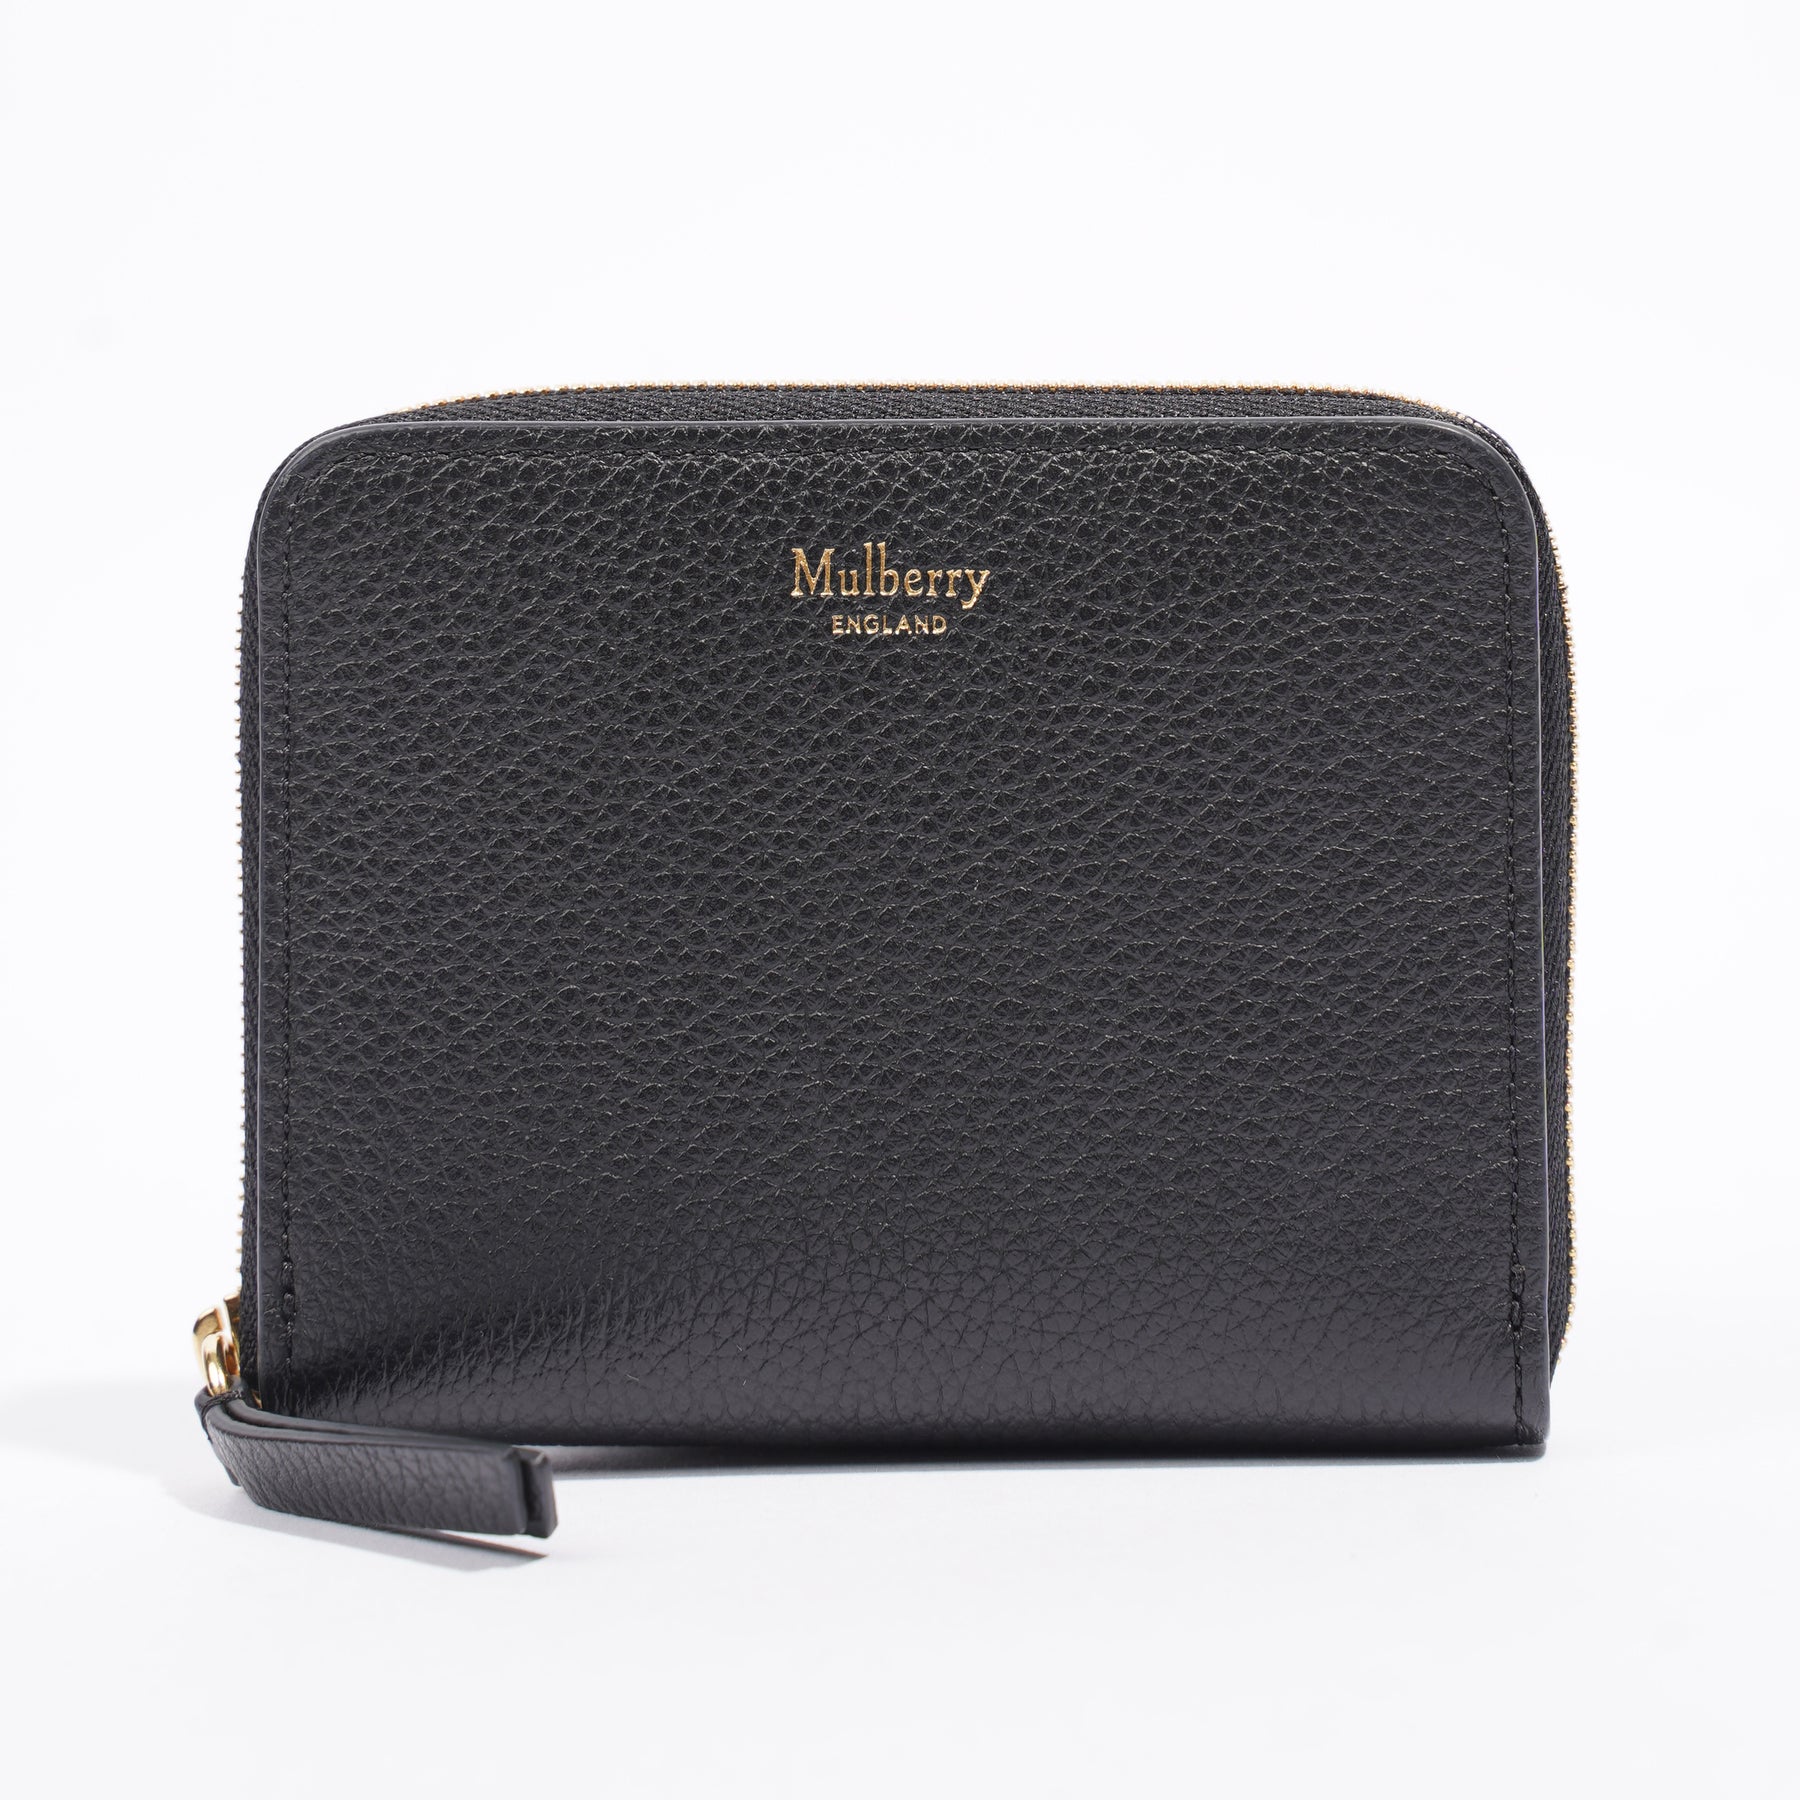 Mulberry Plaque Small Classic Grain Leather 8 Card Zip Around Wallet, Black  at John Lewis & Partners